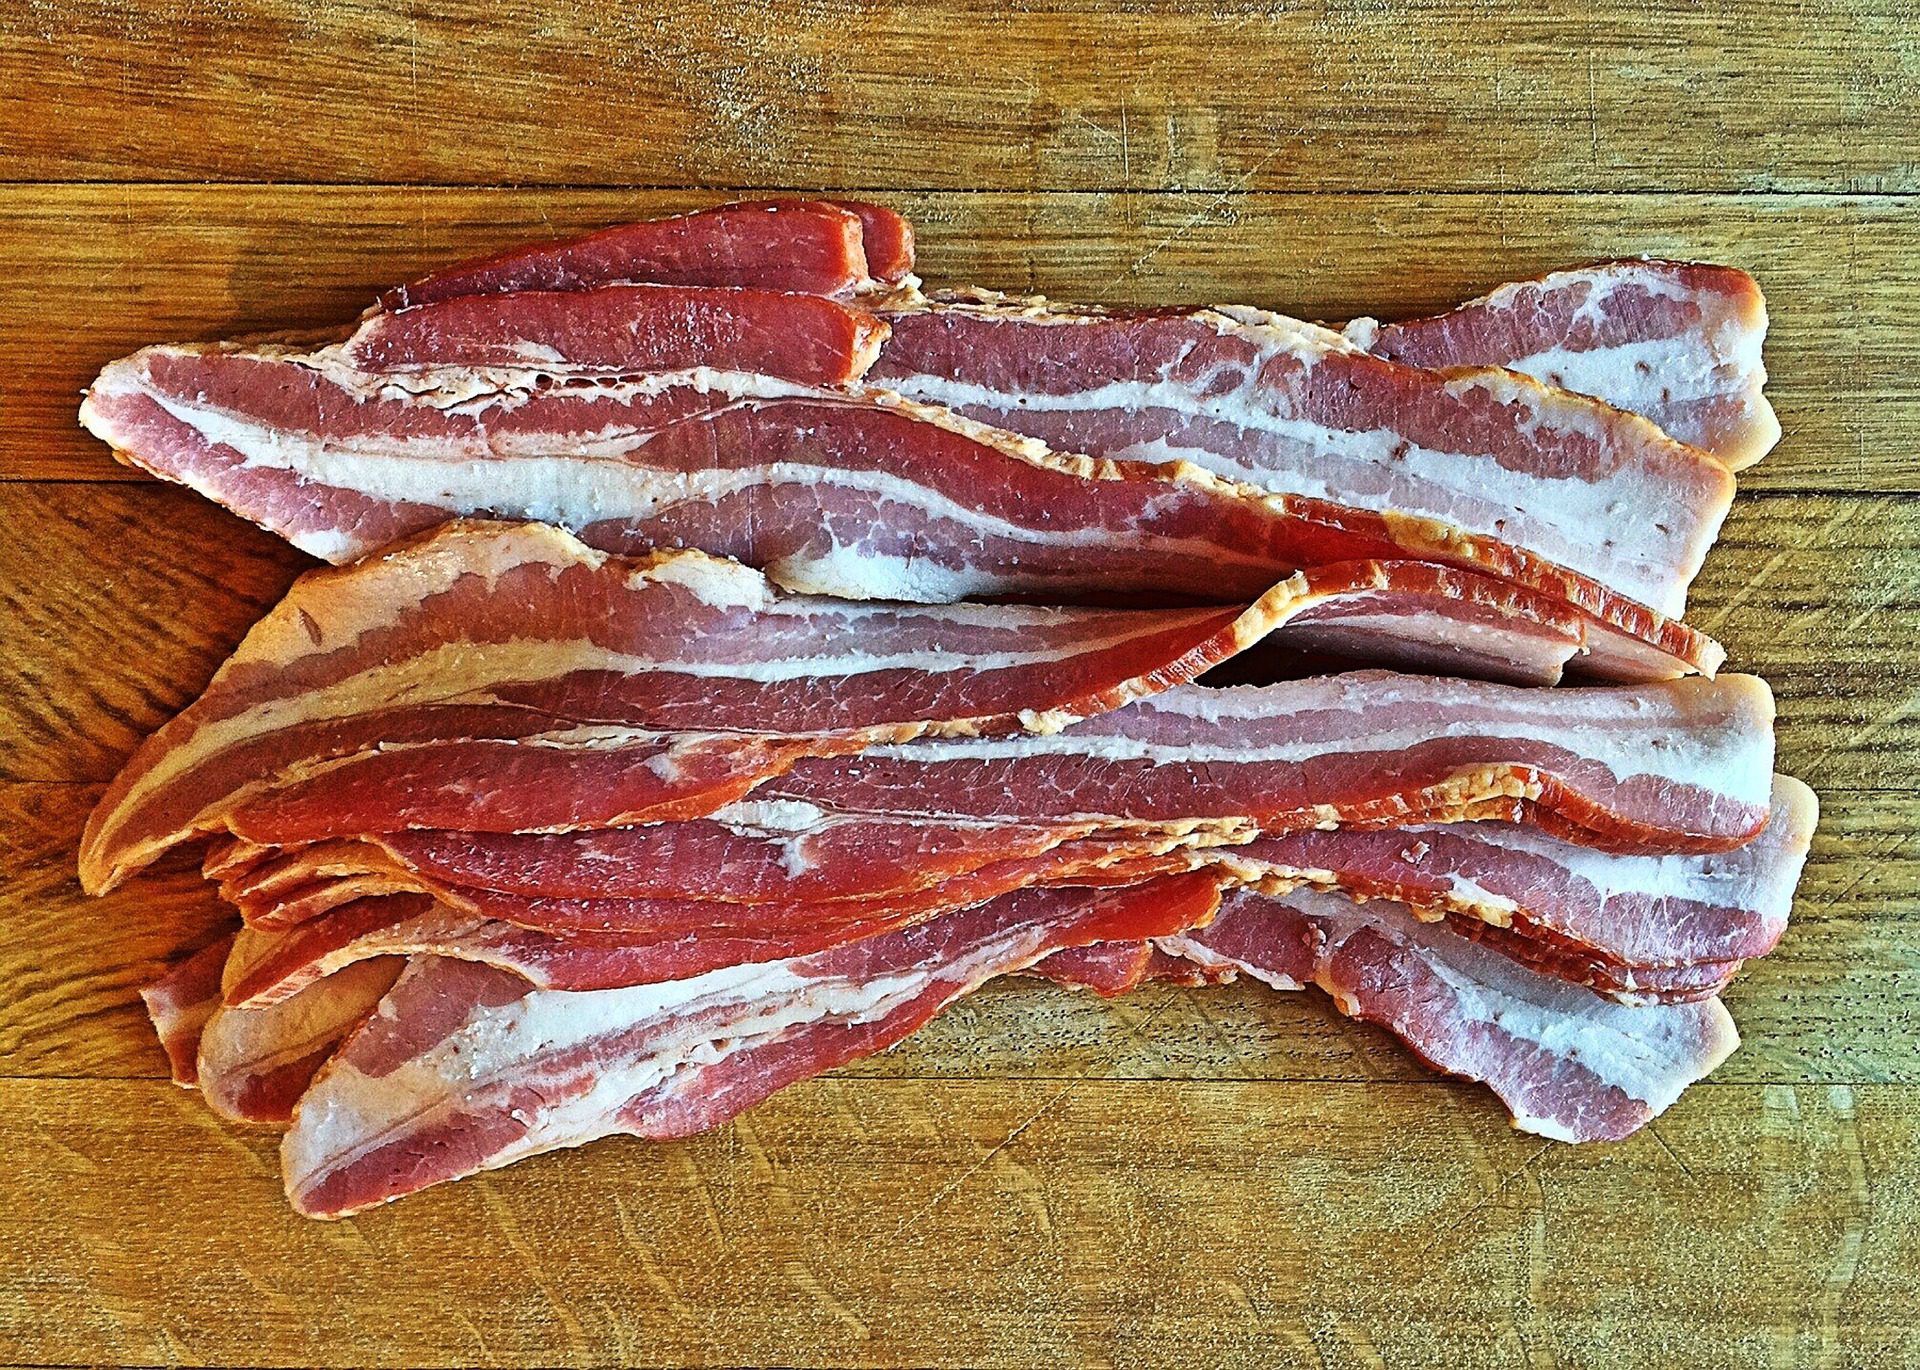 s December 30 a national bacon day